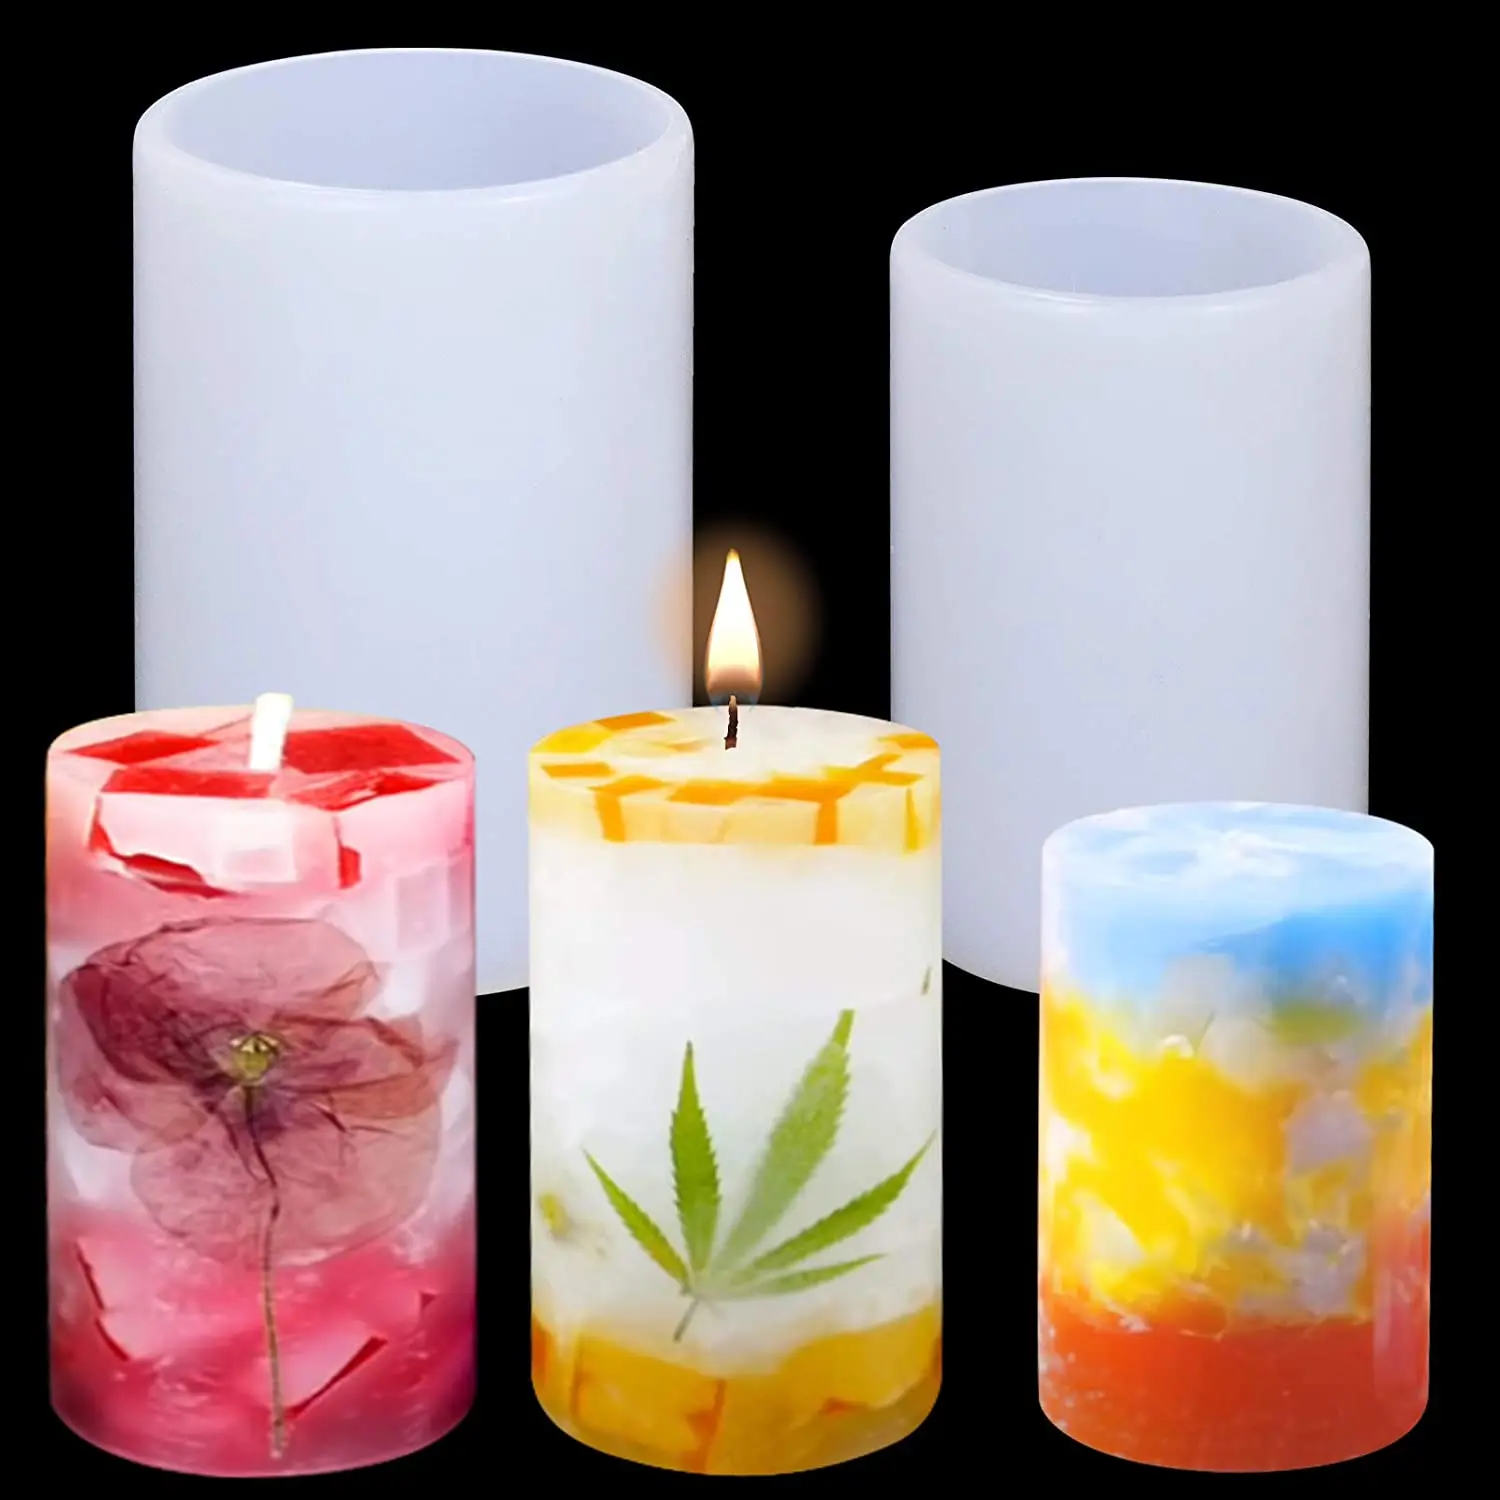 Epoxy Resin Casting Molds for Christmas DIY Crafts Soaps Polymer Clay Pillar Candles Resin Mould for Candle Making 4 Sizes Cylinder Silicone Candle Molds 